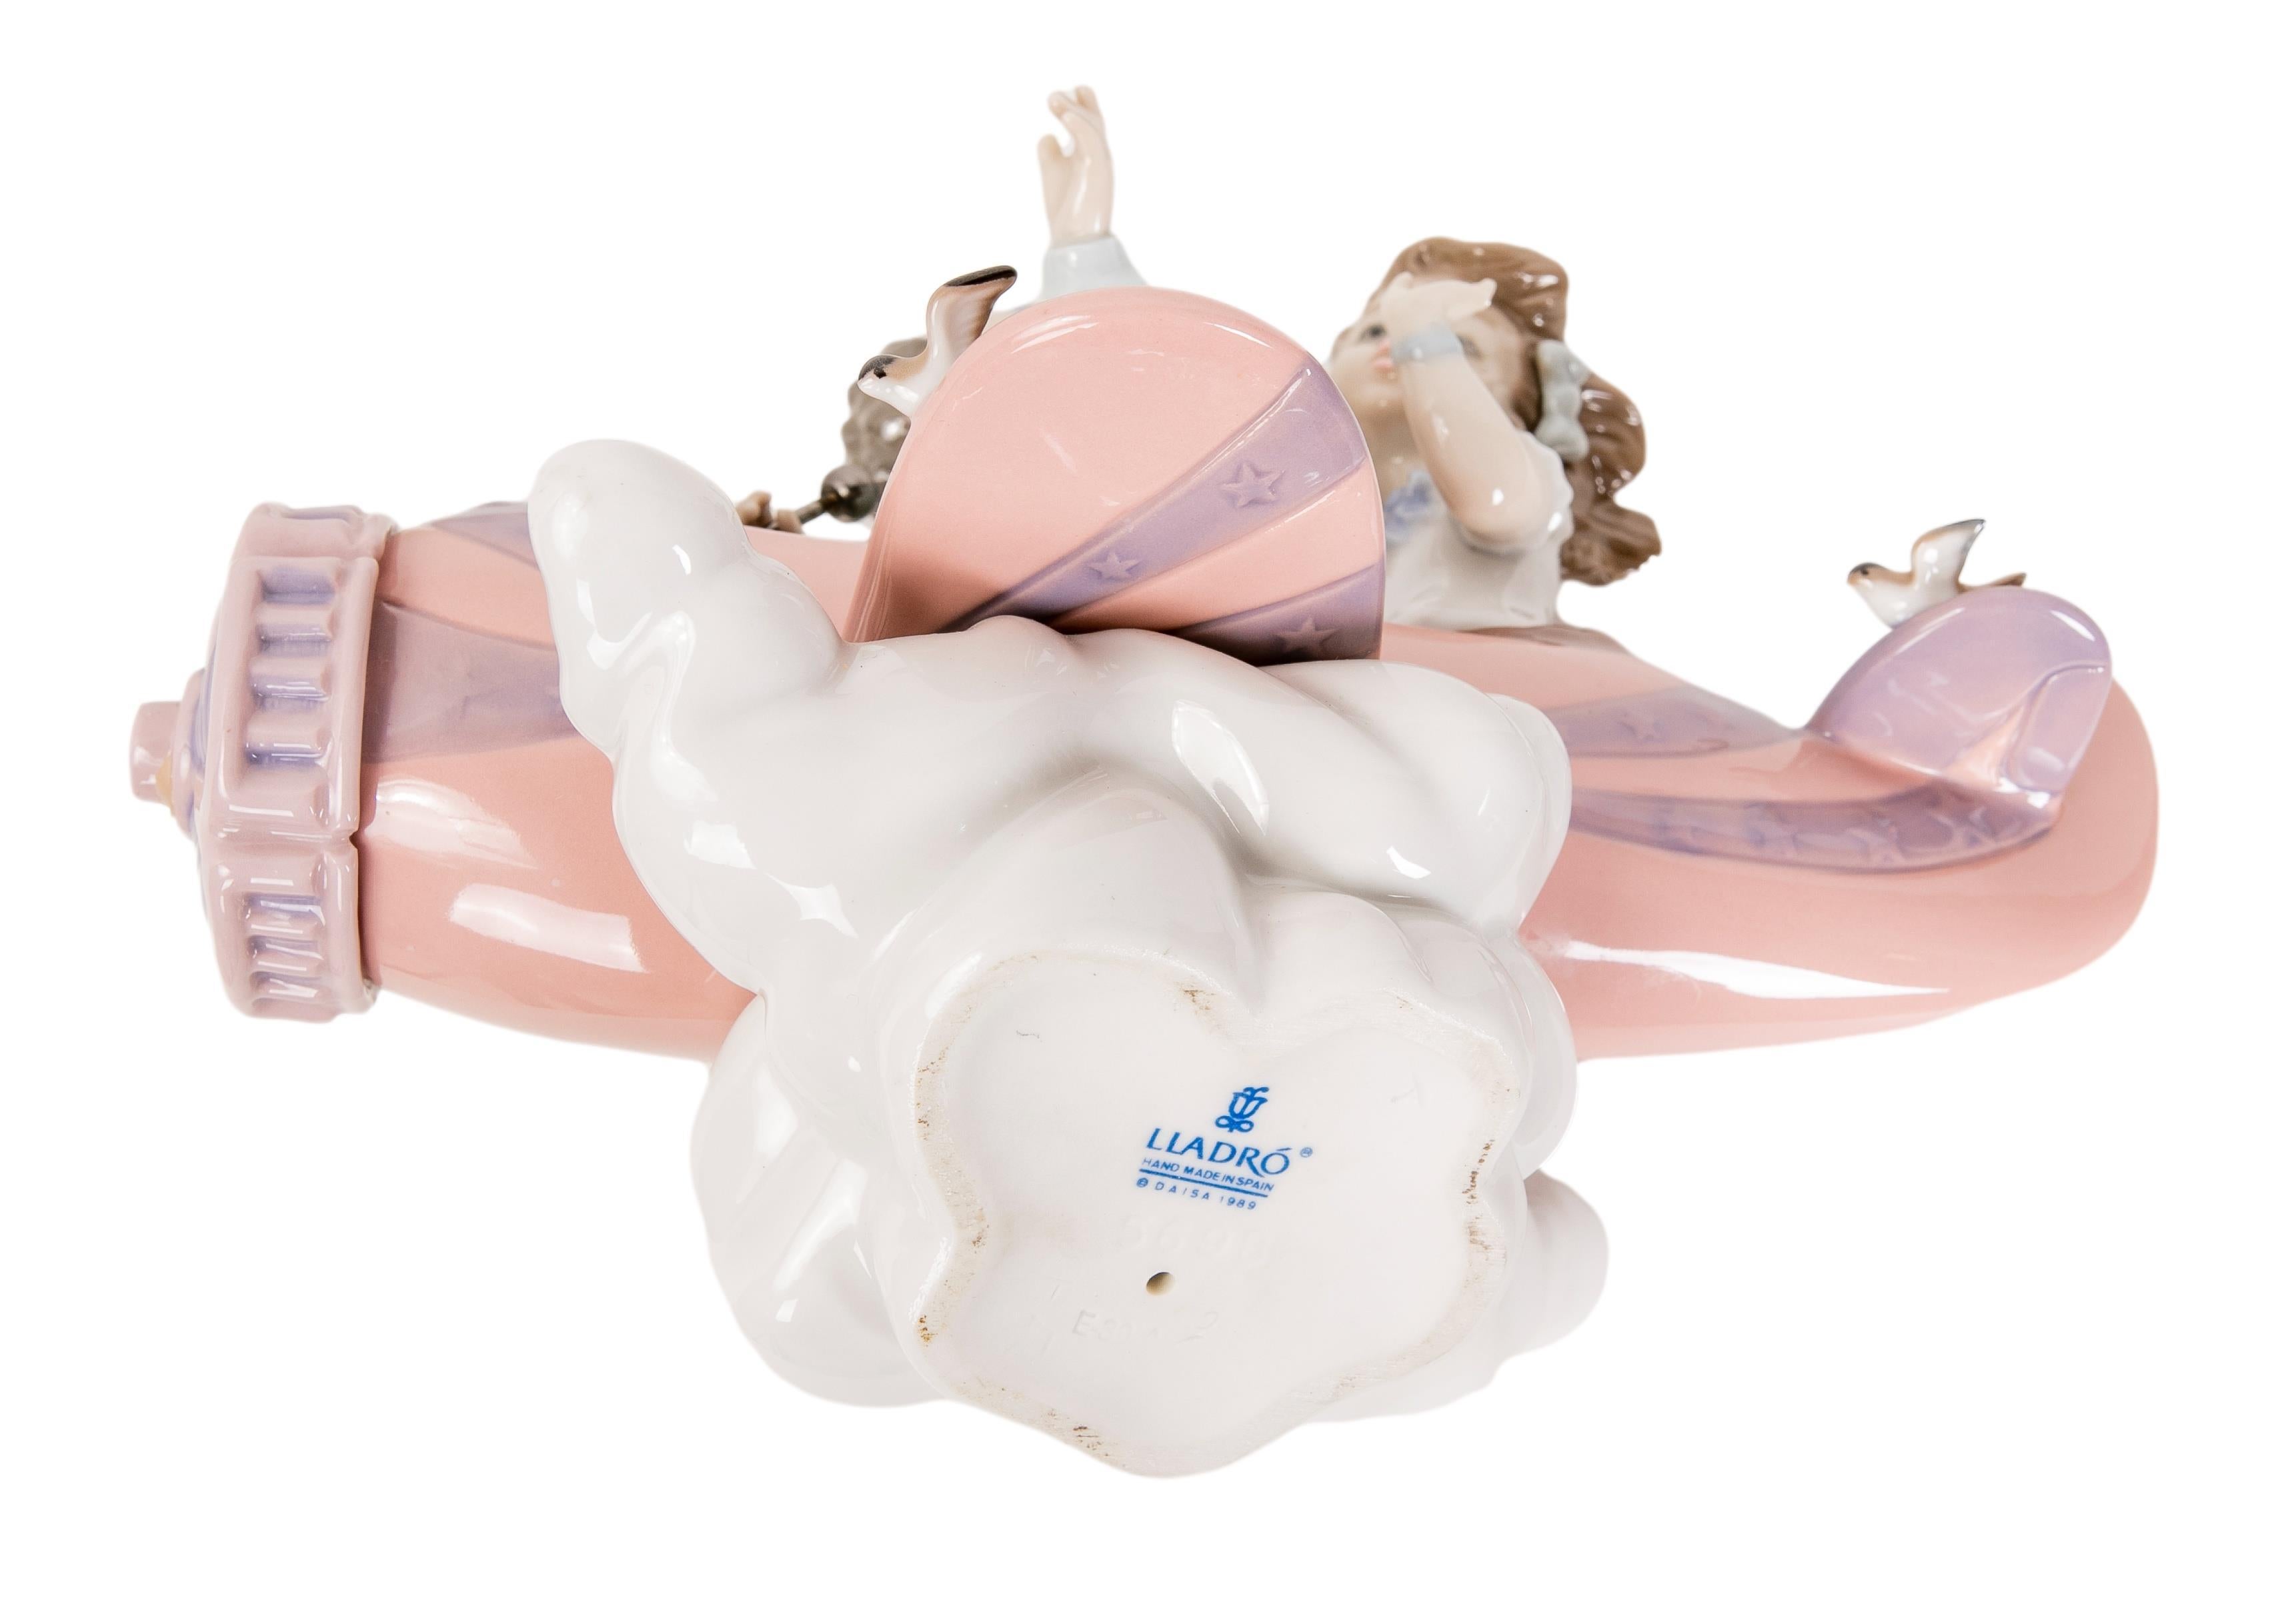 1989 Porcelain Figure of Children in Airplane Signed by the House of LLadró For Sale 8